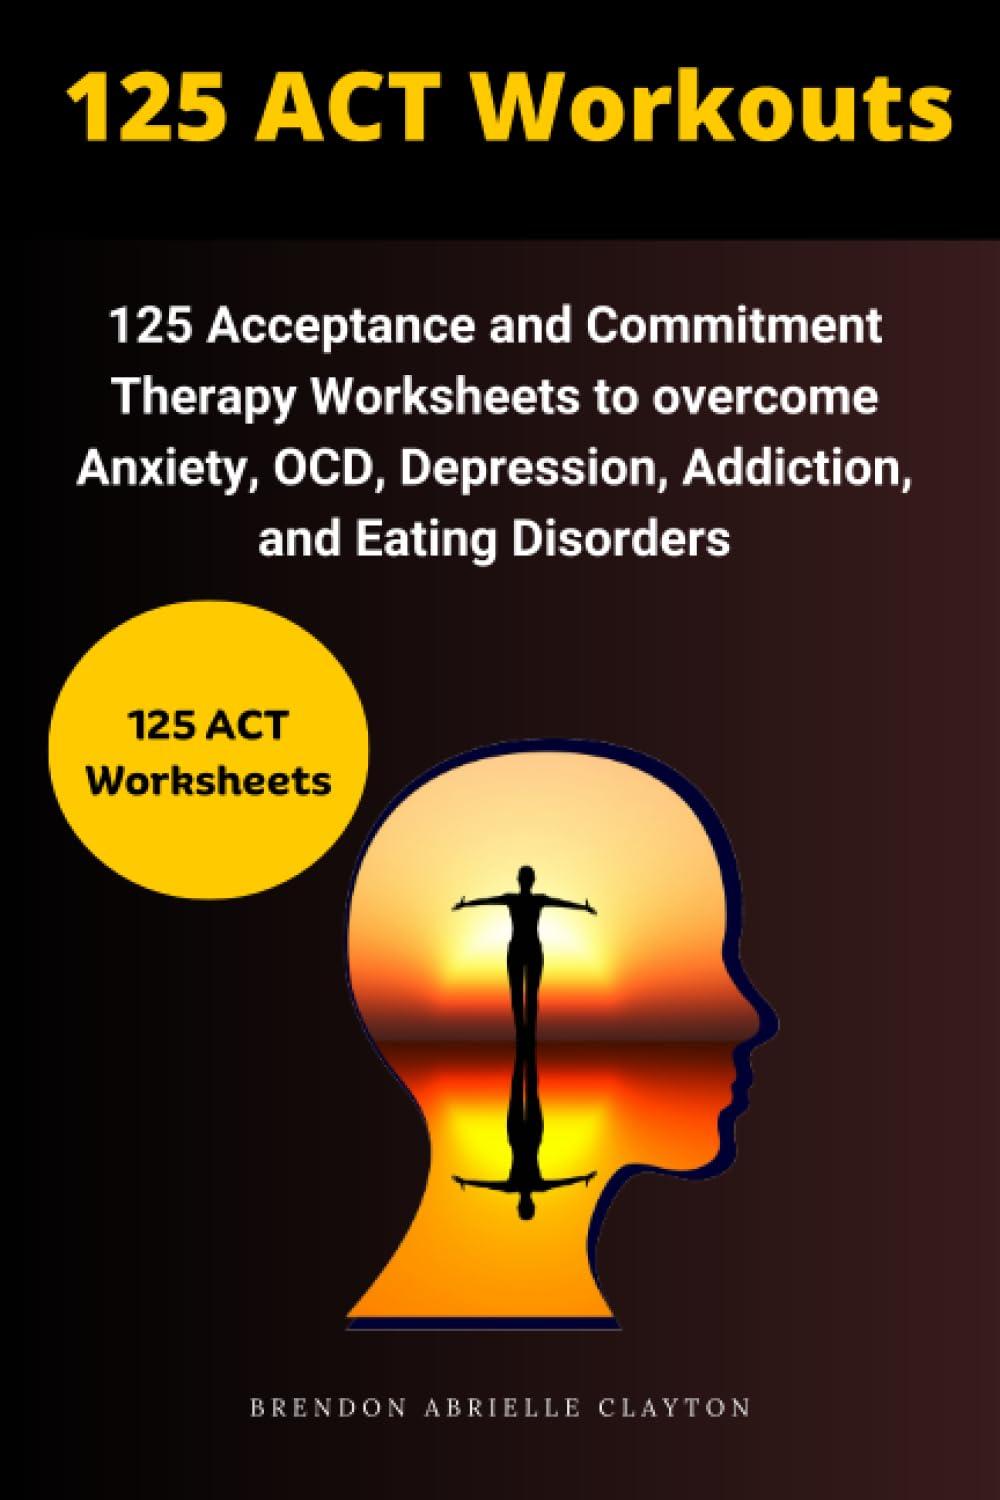 125 ACT Workouts 125 Acceptance And Commitment Therapy Worksheets To Overcome Anxiety OCD Depression Addiction And Eating Disorders